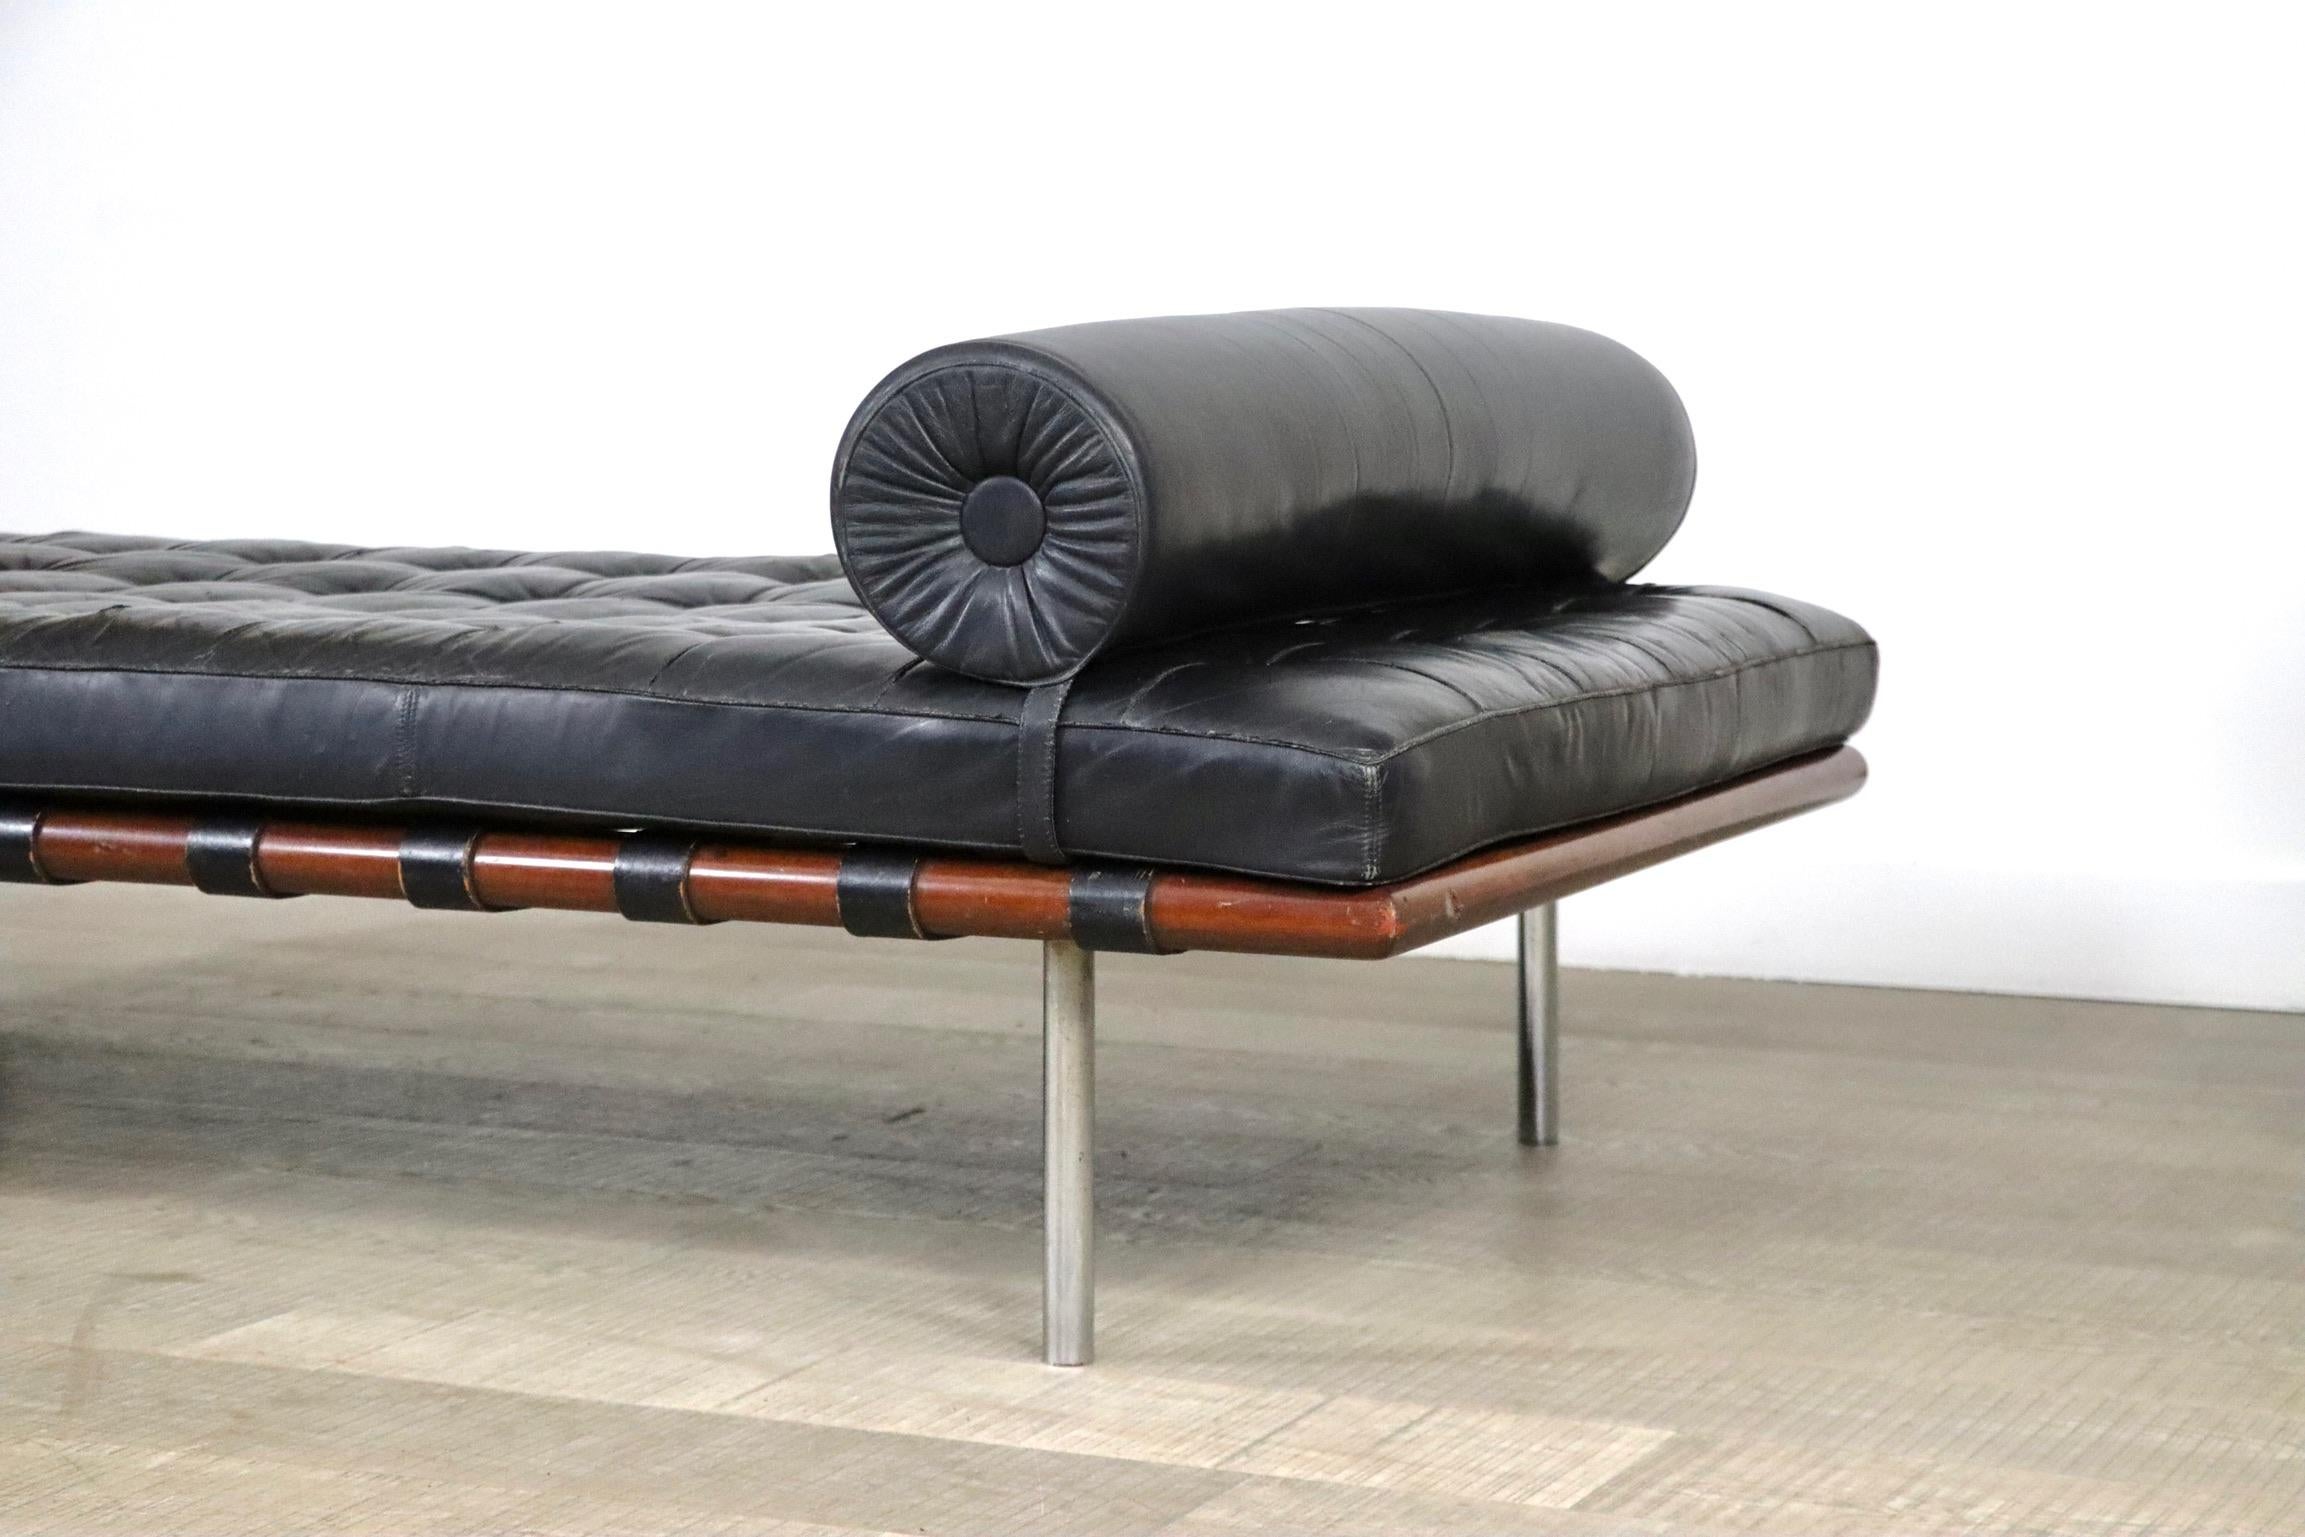 Vintage Knoll Barcelona daybed by Ludwig Mies van der Rohe 6